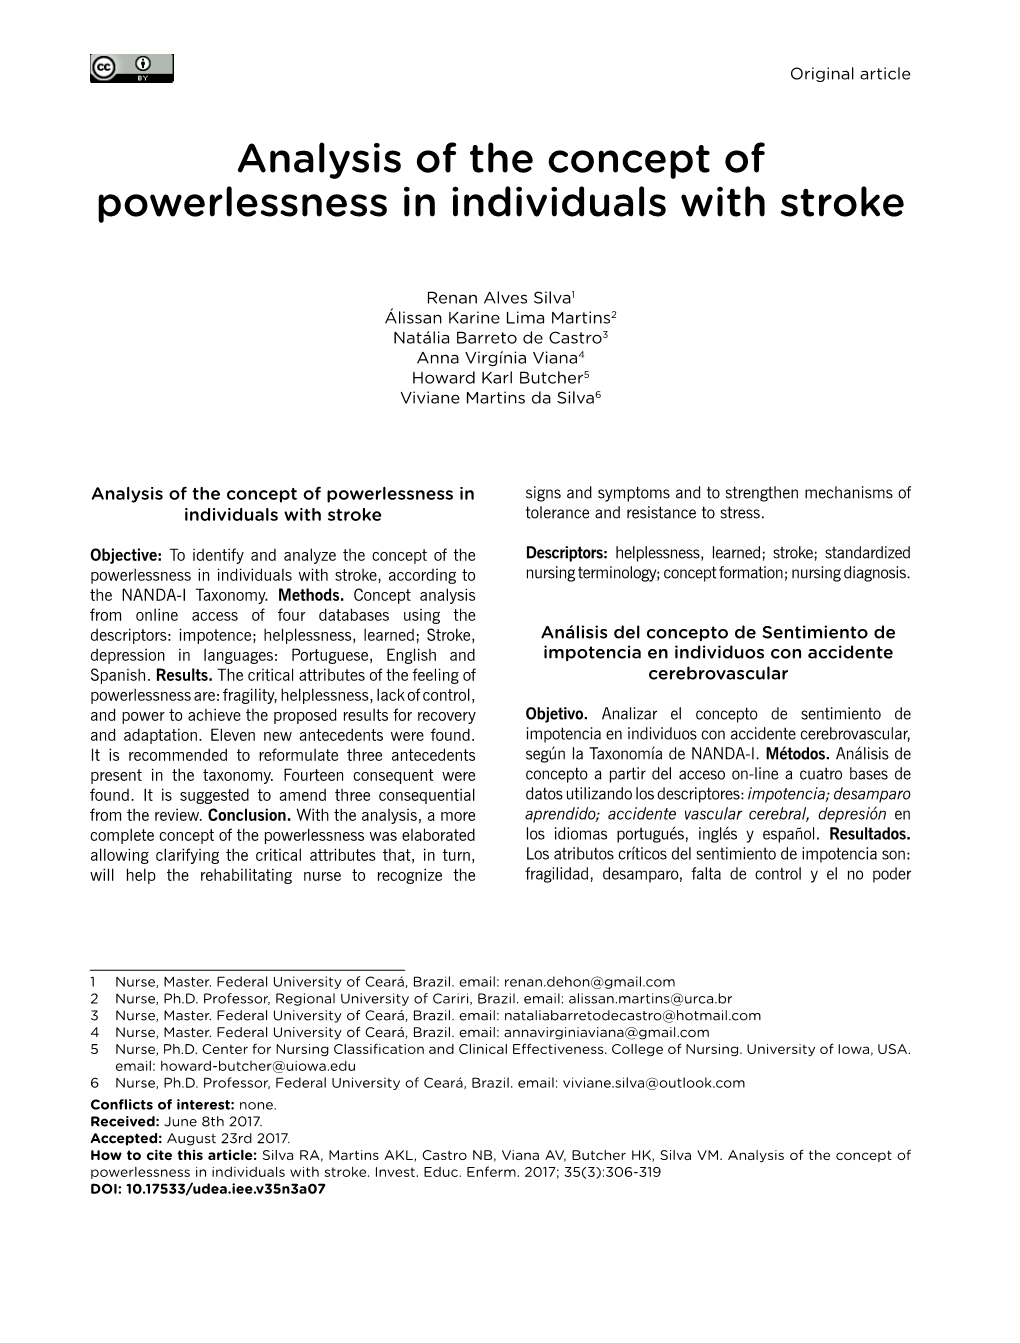 Analysis of the Concept of Powerlessness in Individuals with Stroke